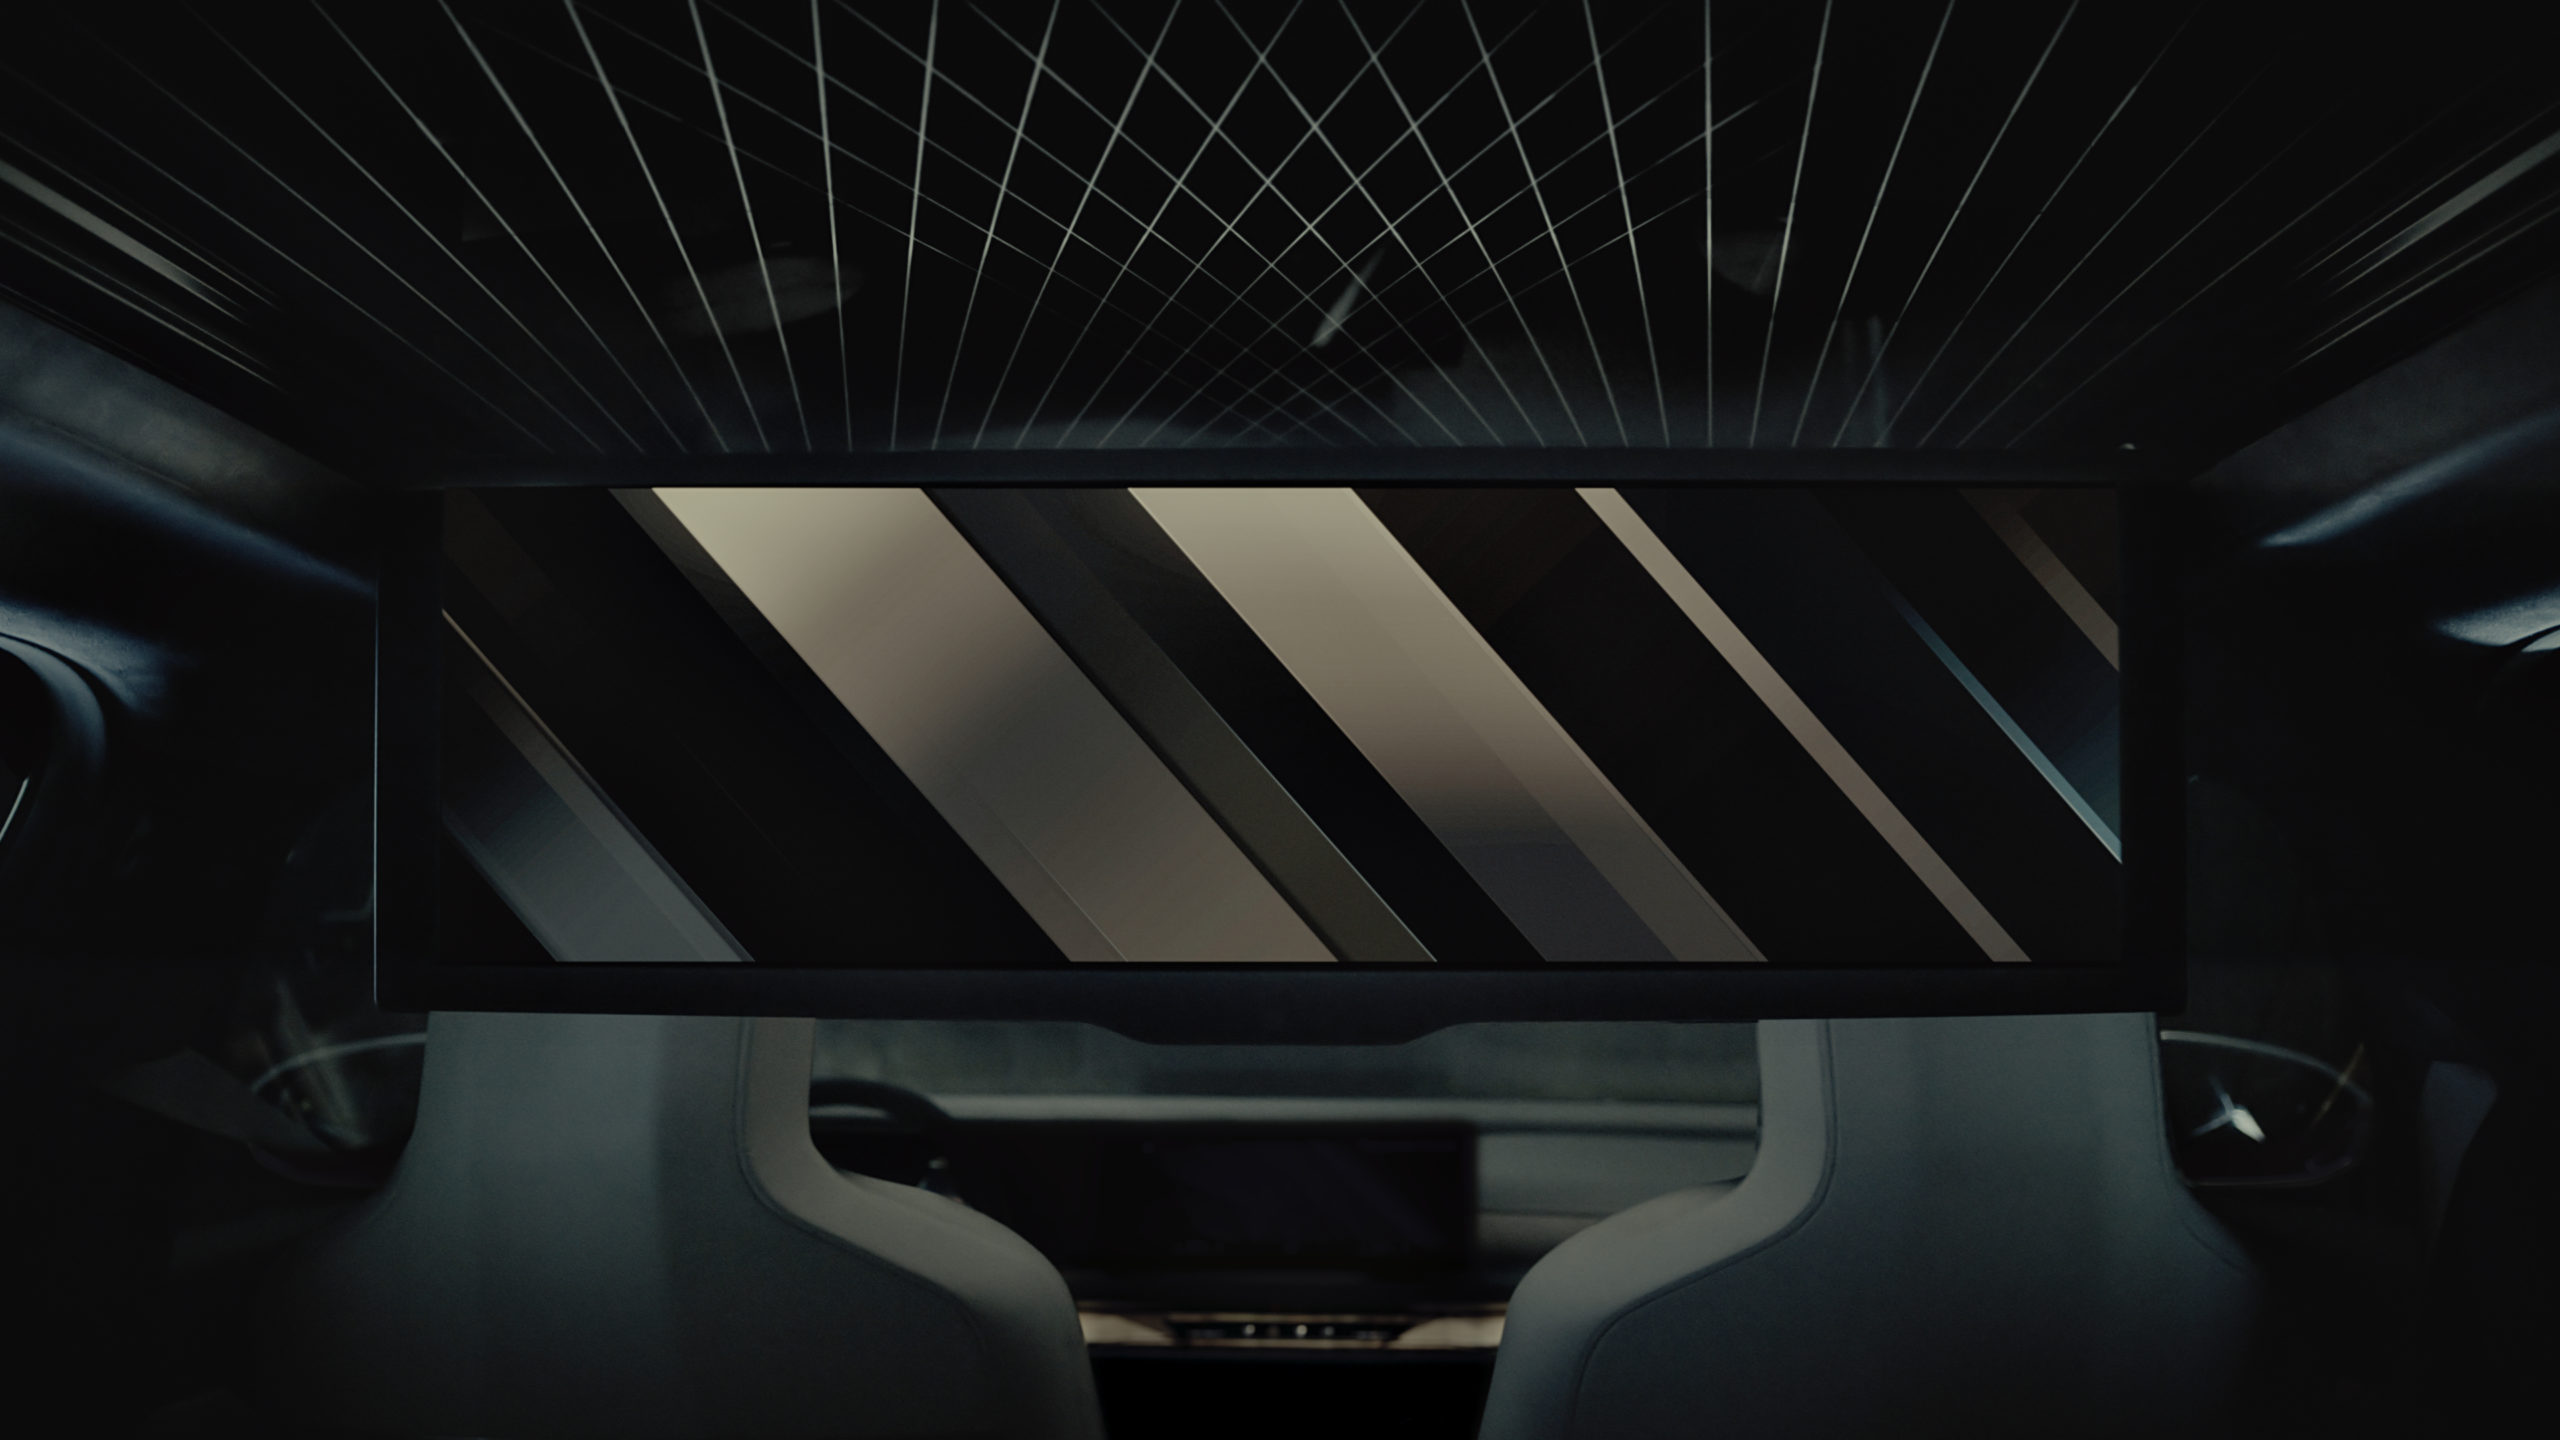 Teaser for the new BMW 7 Series